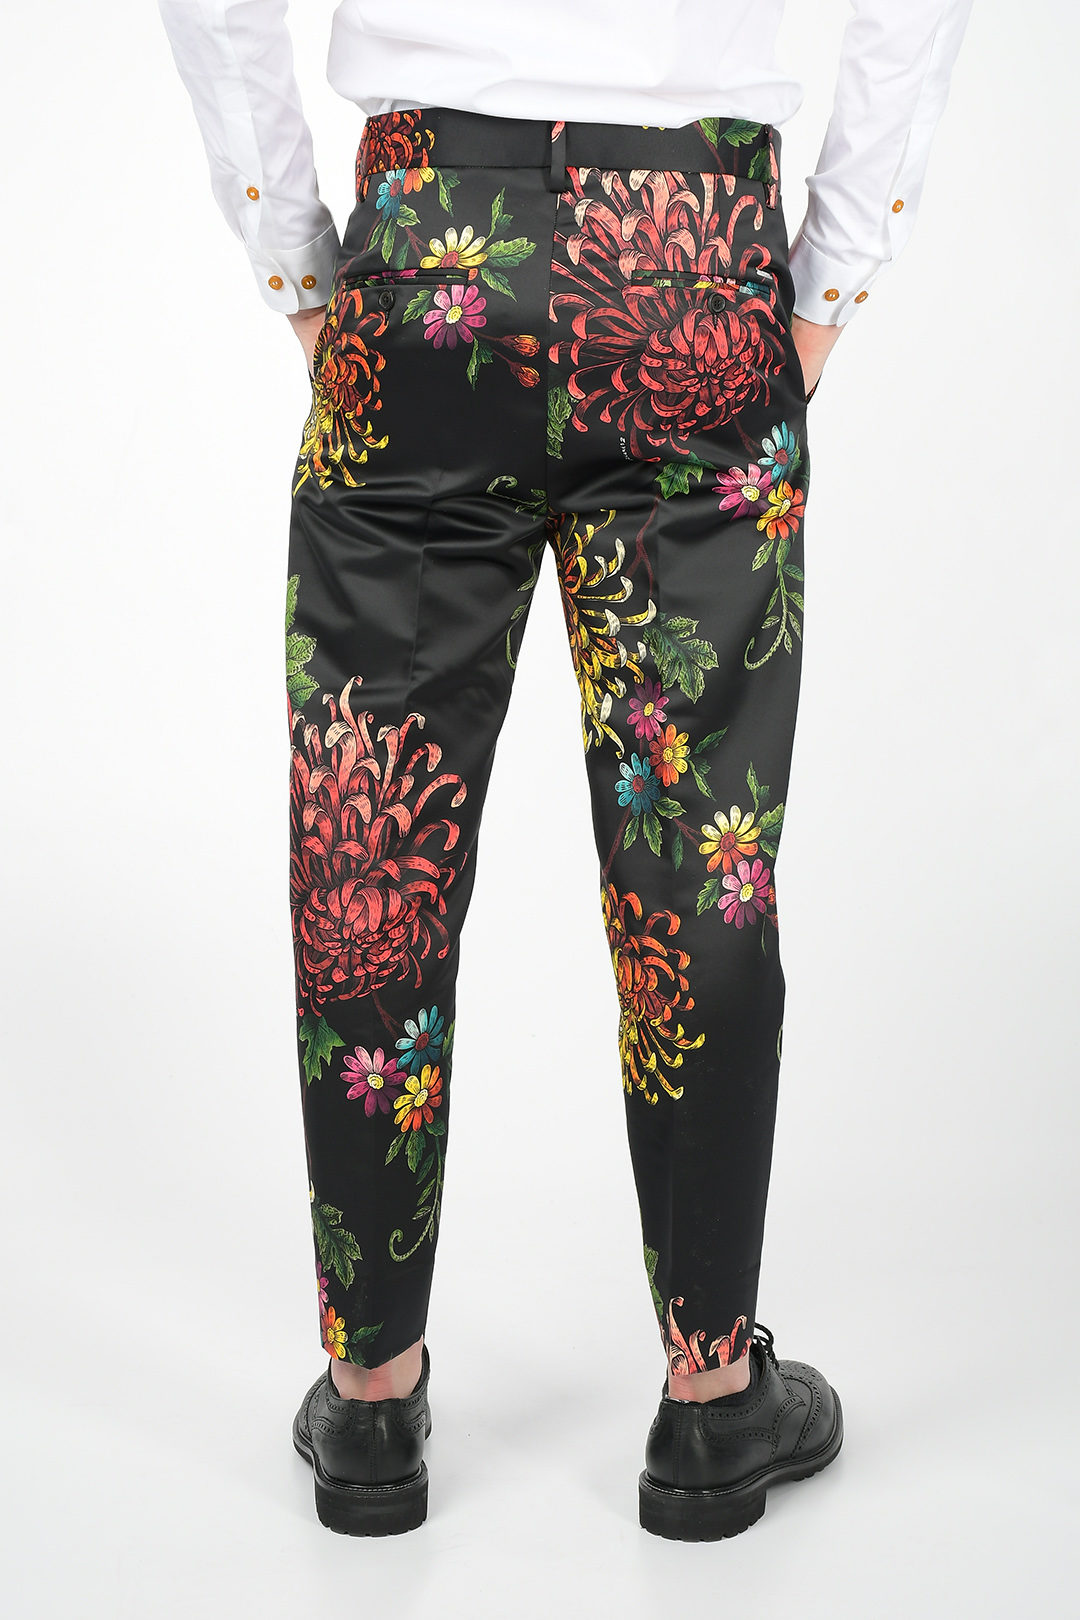 Mens Casual Garden Prints Floral Pants for The Summer Pants Trousers Print  Straight Pants for Men Pants Red Pants  Wish